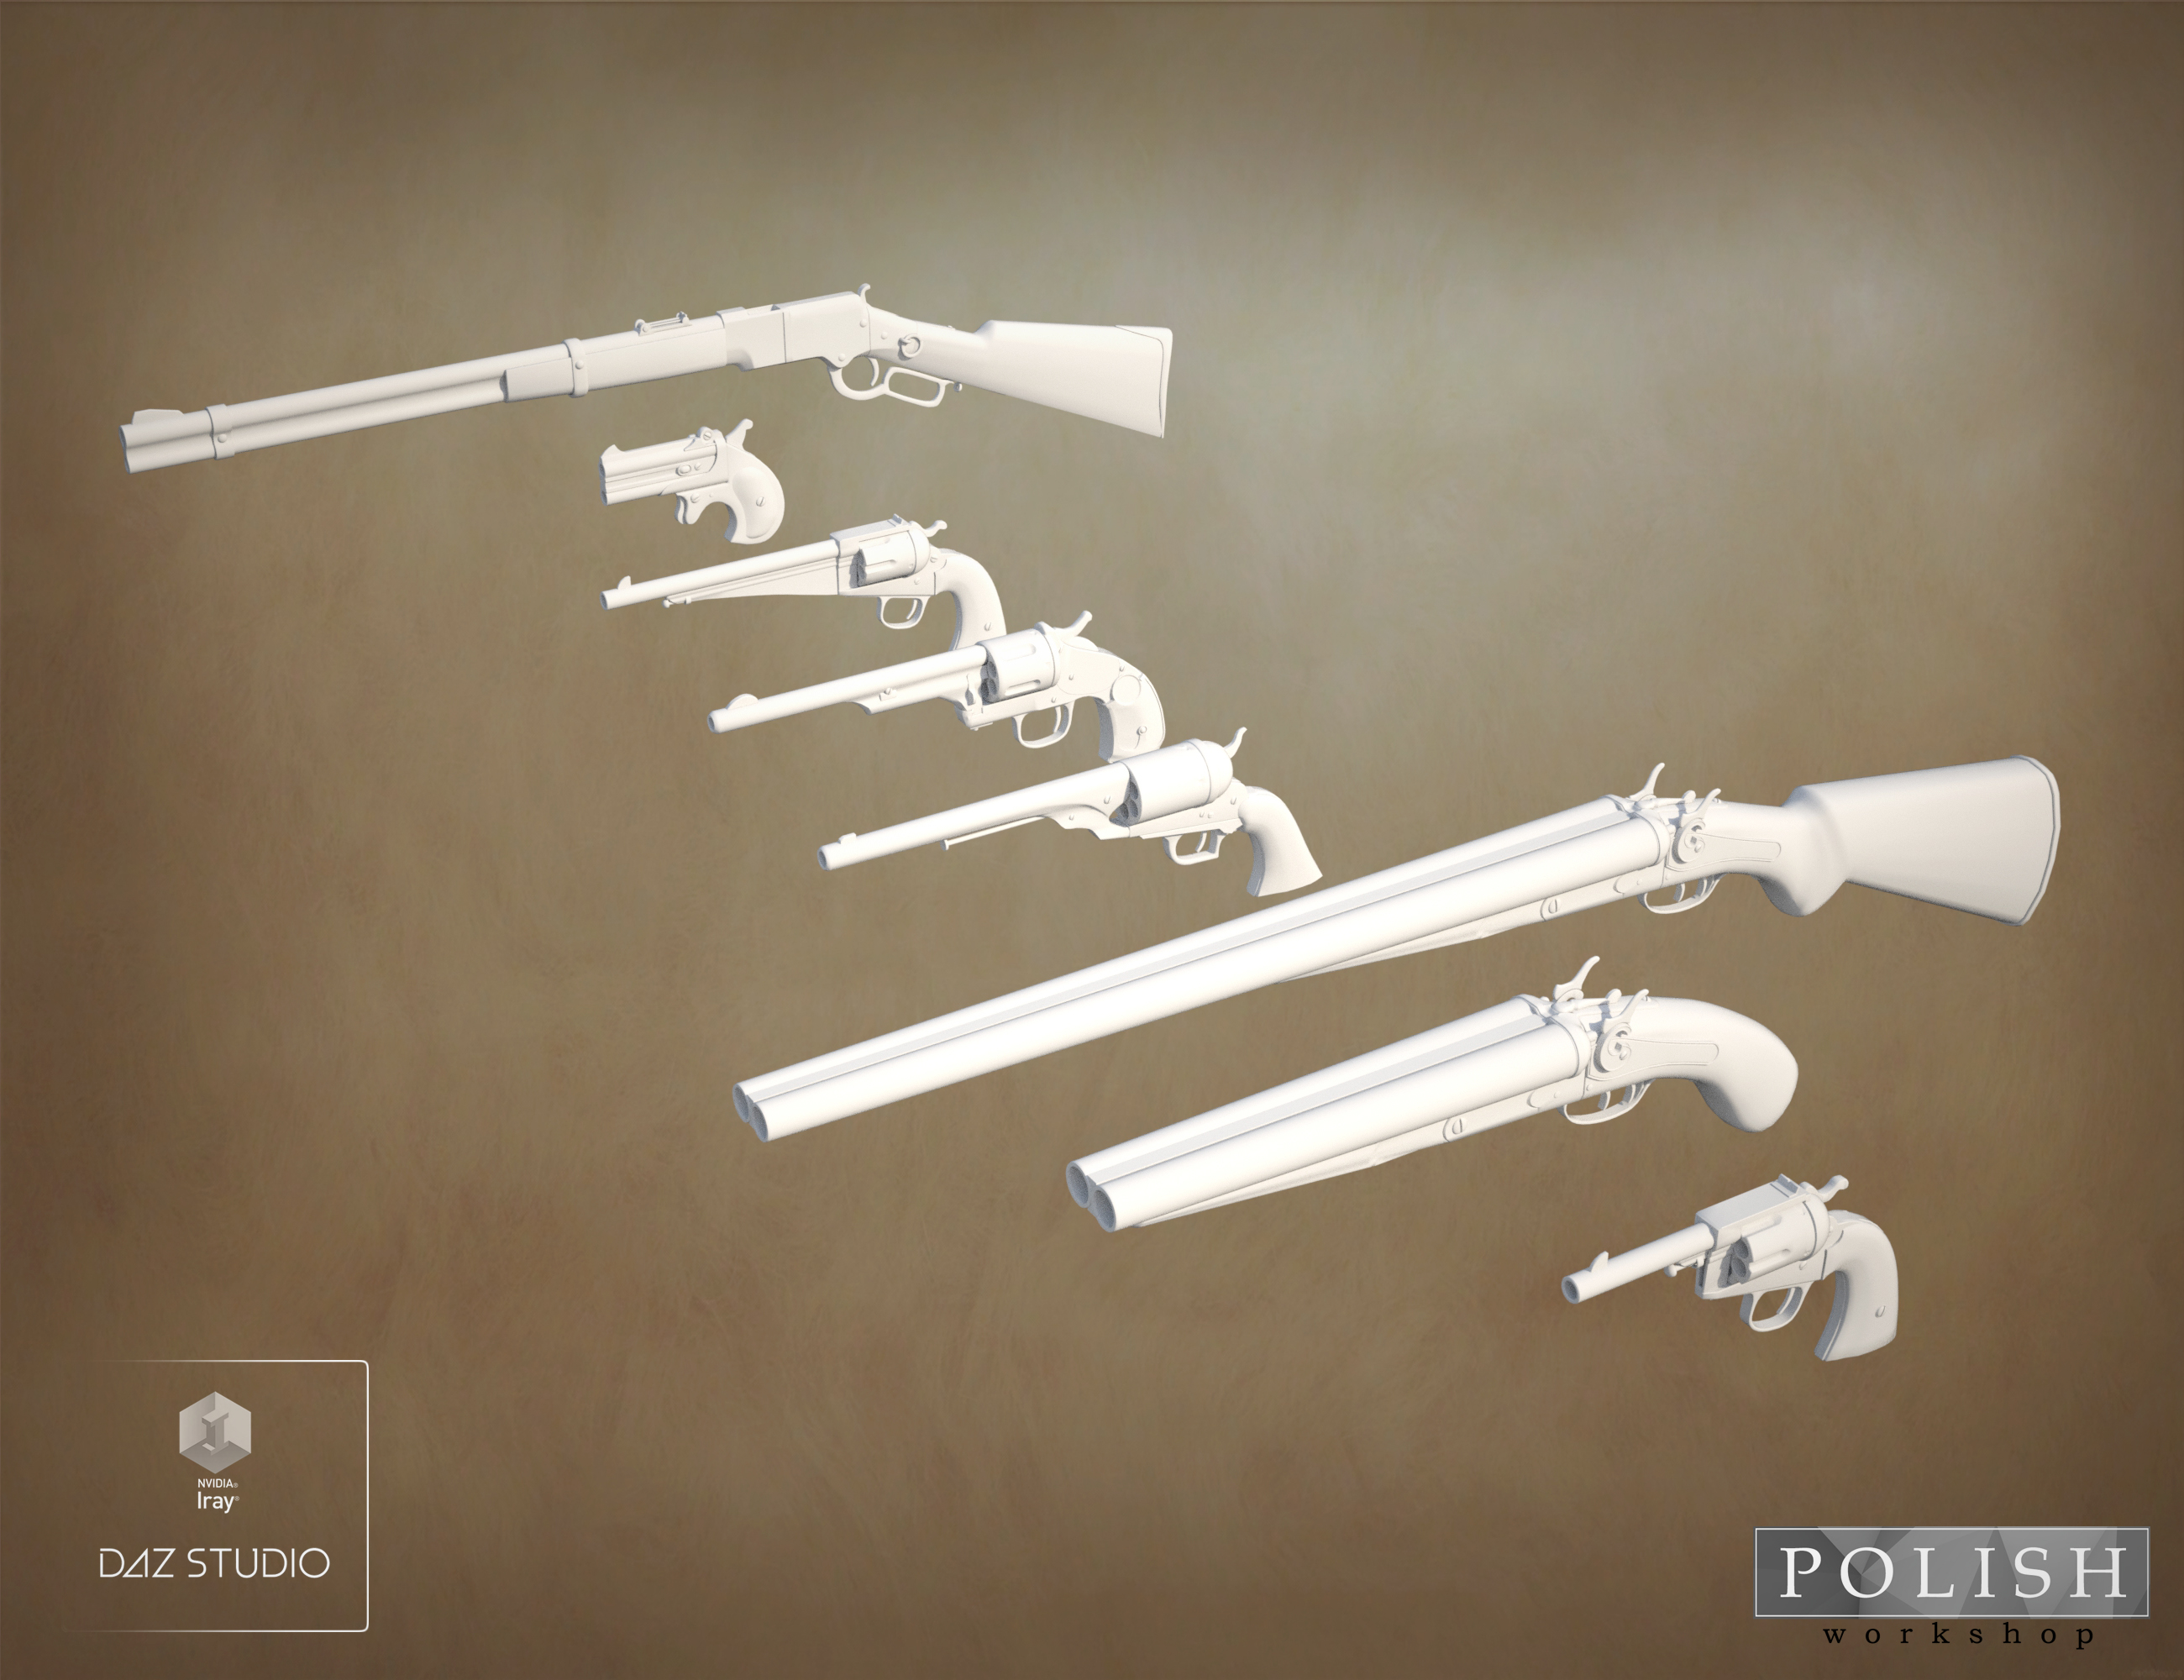 Western Weapon Collection by: Polish, 3D Models by Daz 3D